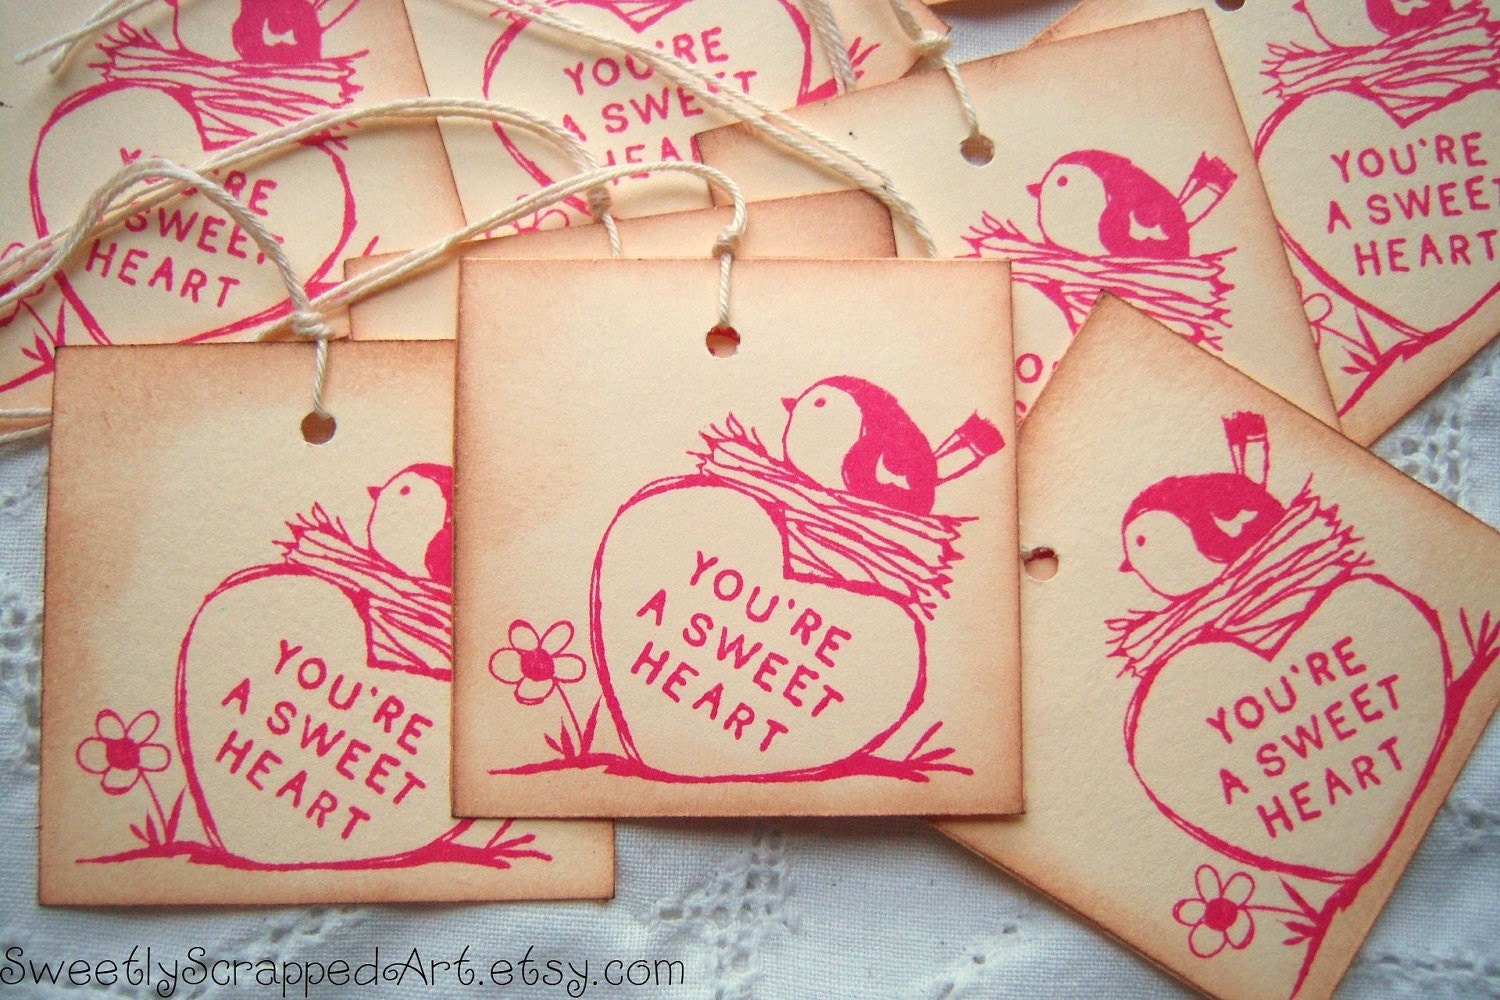 You're a SWEETHEART Hang Tags Vintage Inspired with Bird